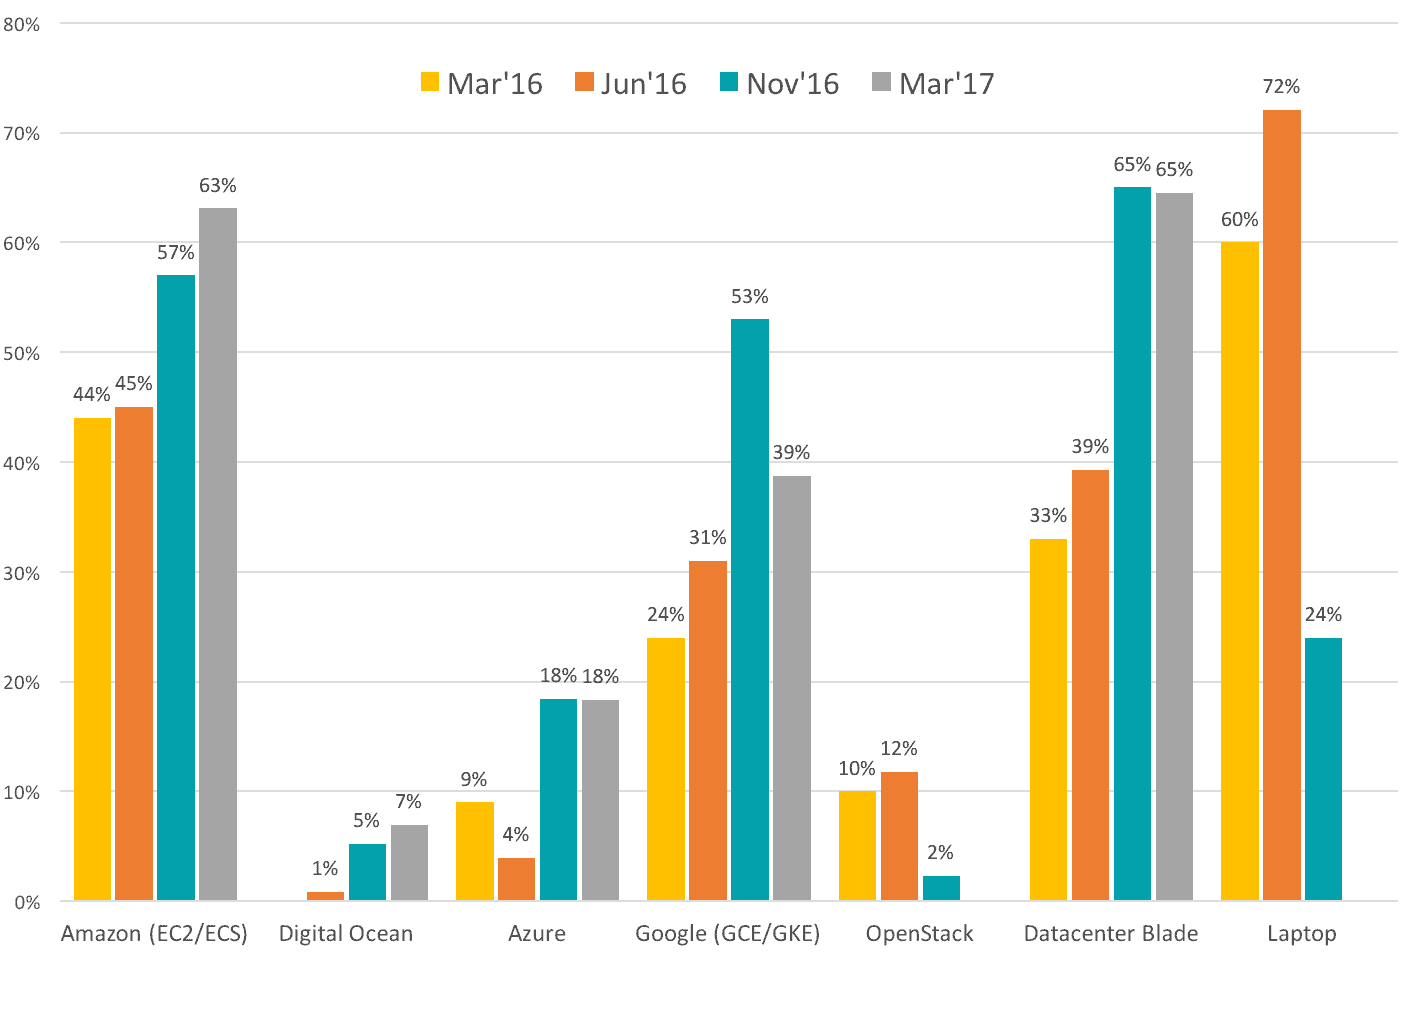 Bar chart shows respondent's choice of container deployment platforms in March 2016, June 2016, November 2016, and March 2017